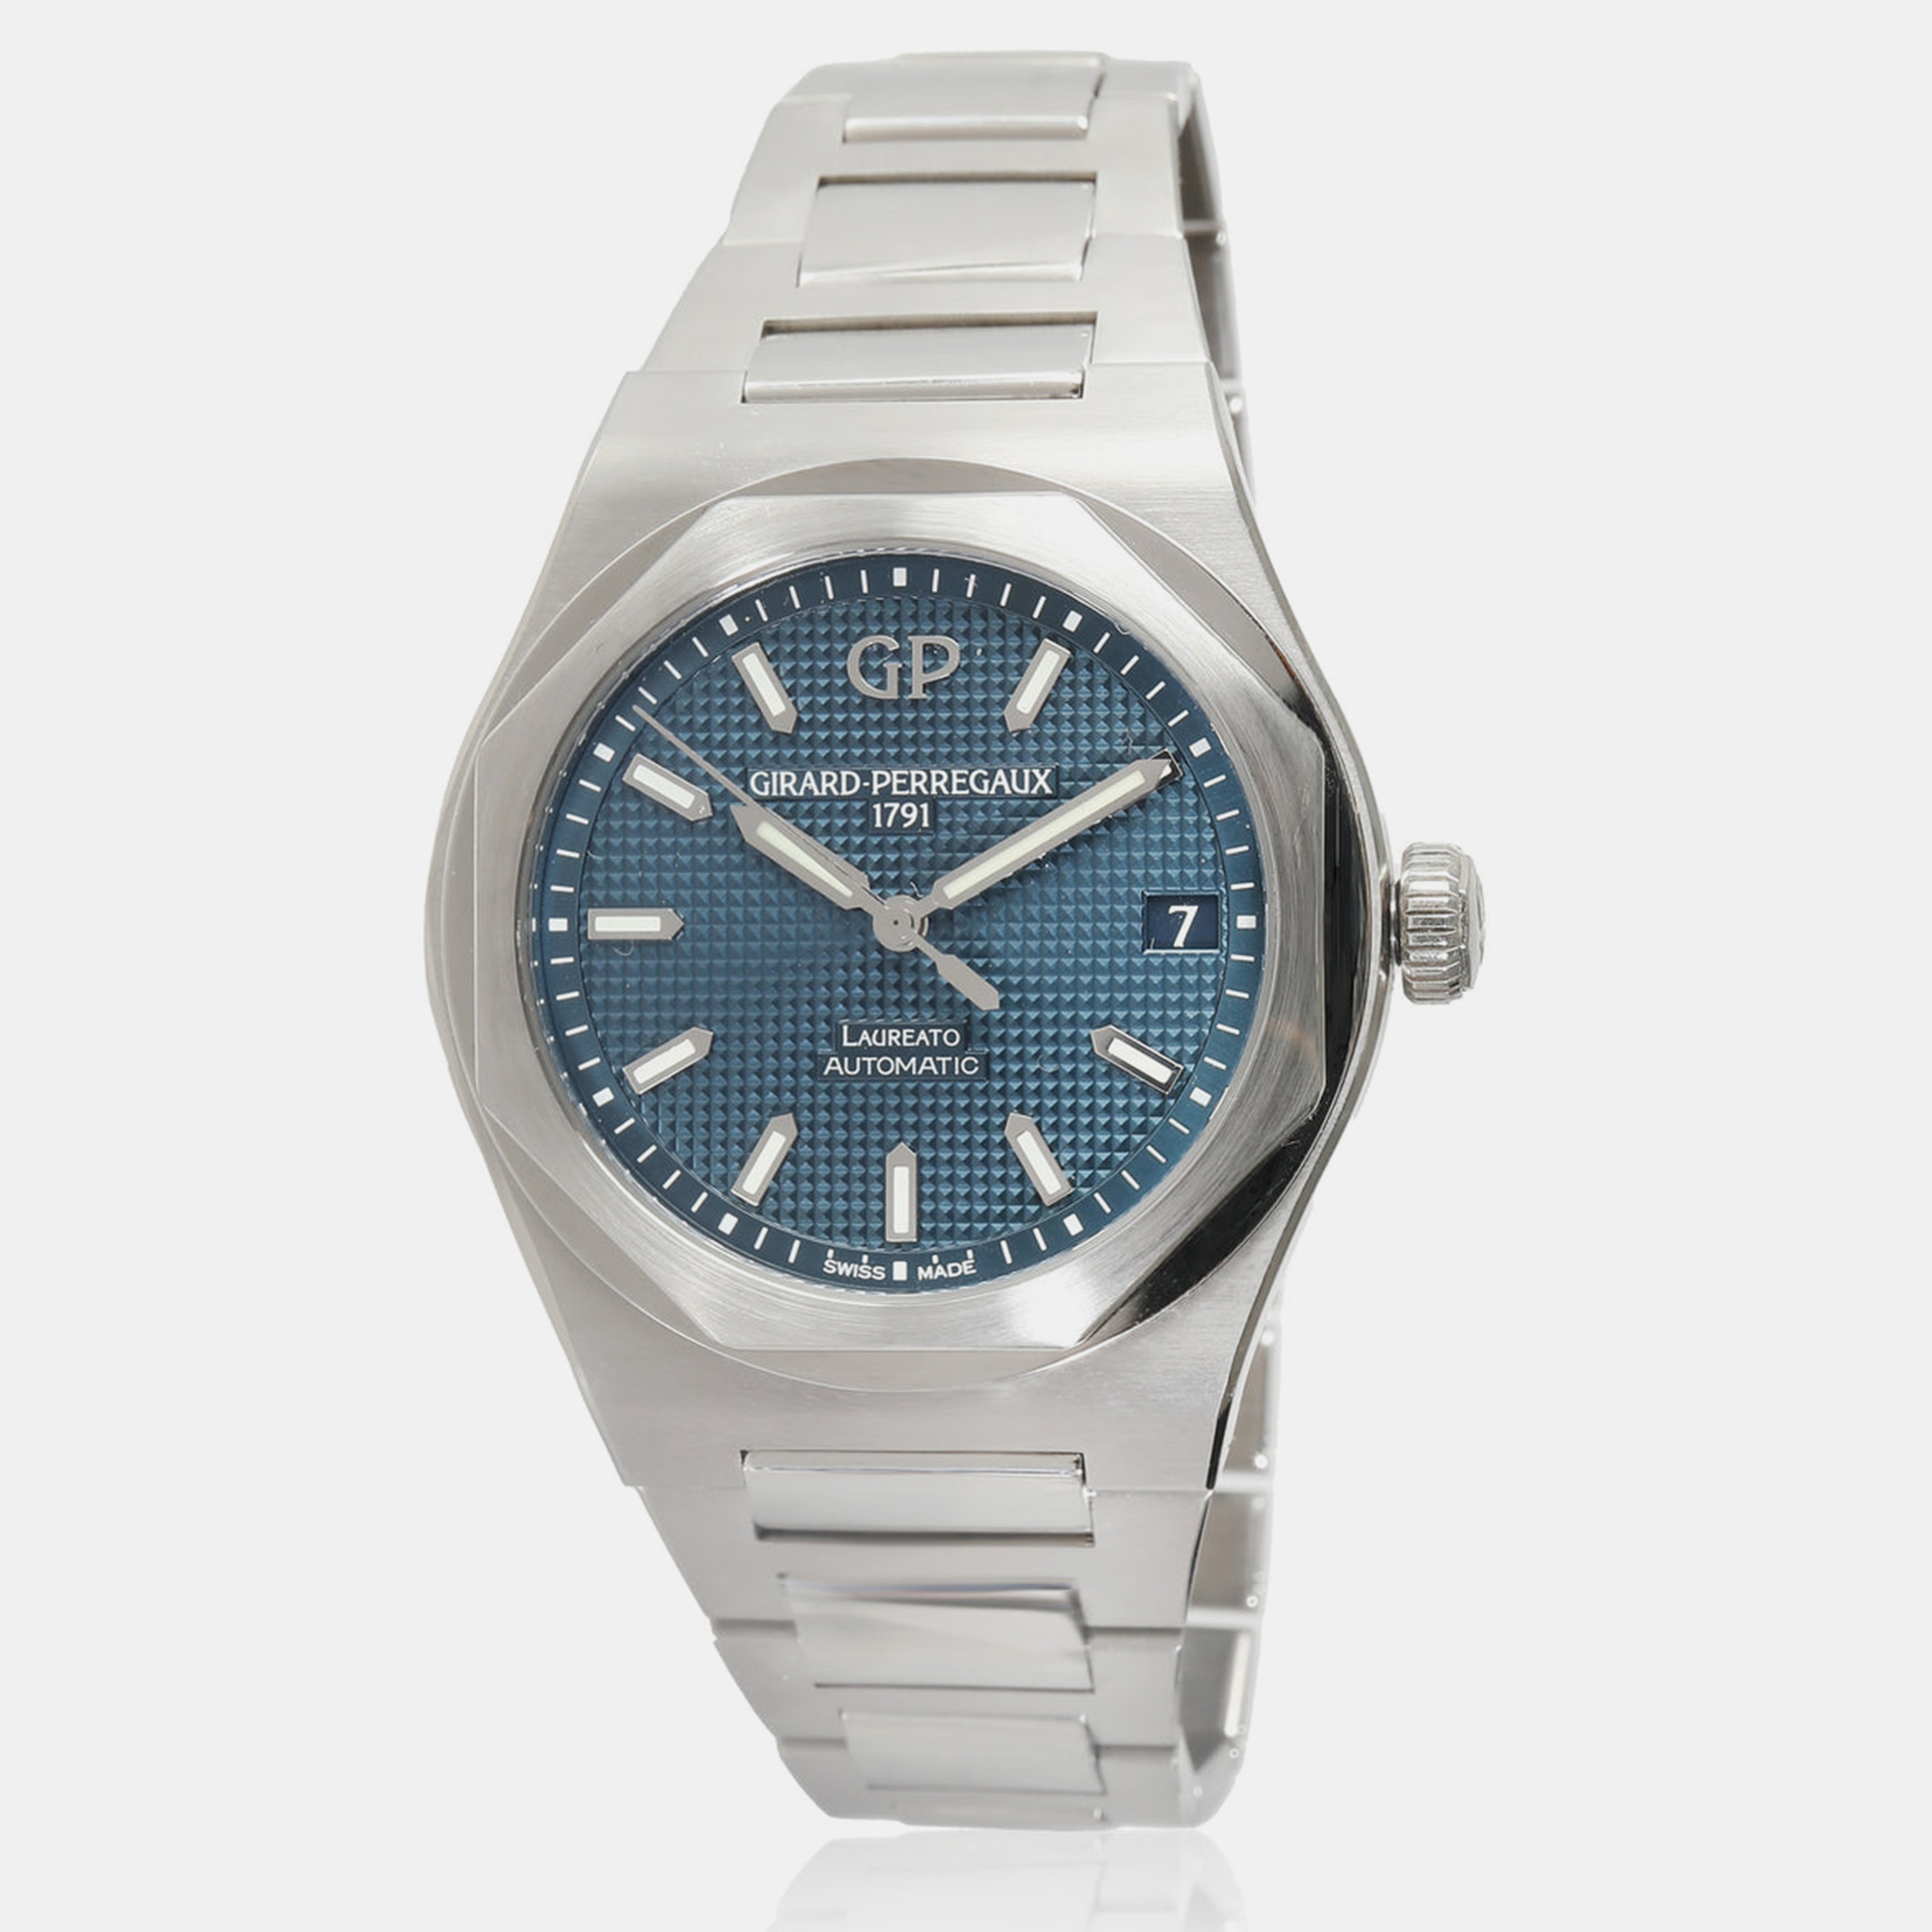 Girard perregaux blue stainless steel laureato 81010-431-11a automatic men's wristwatch 42 mm